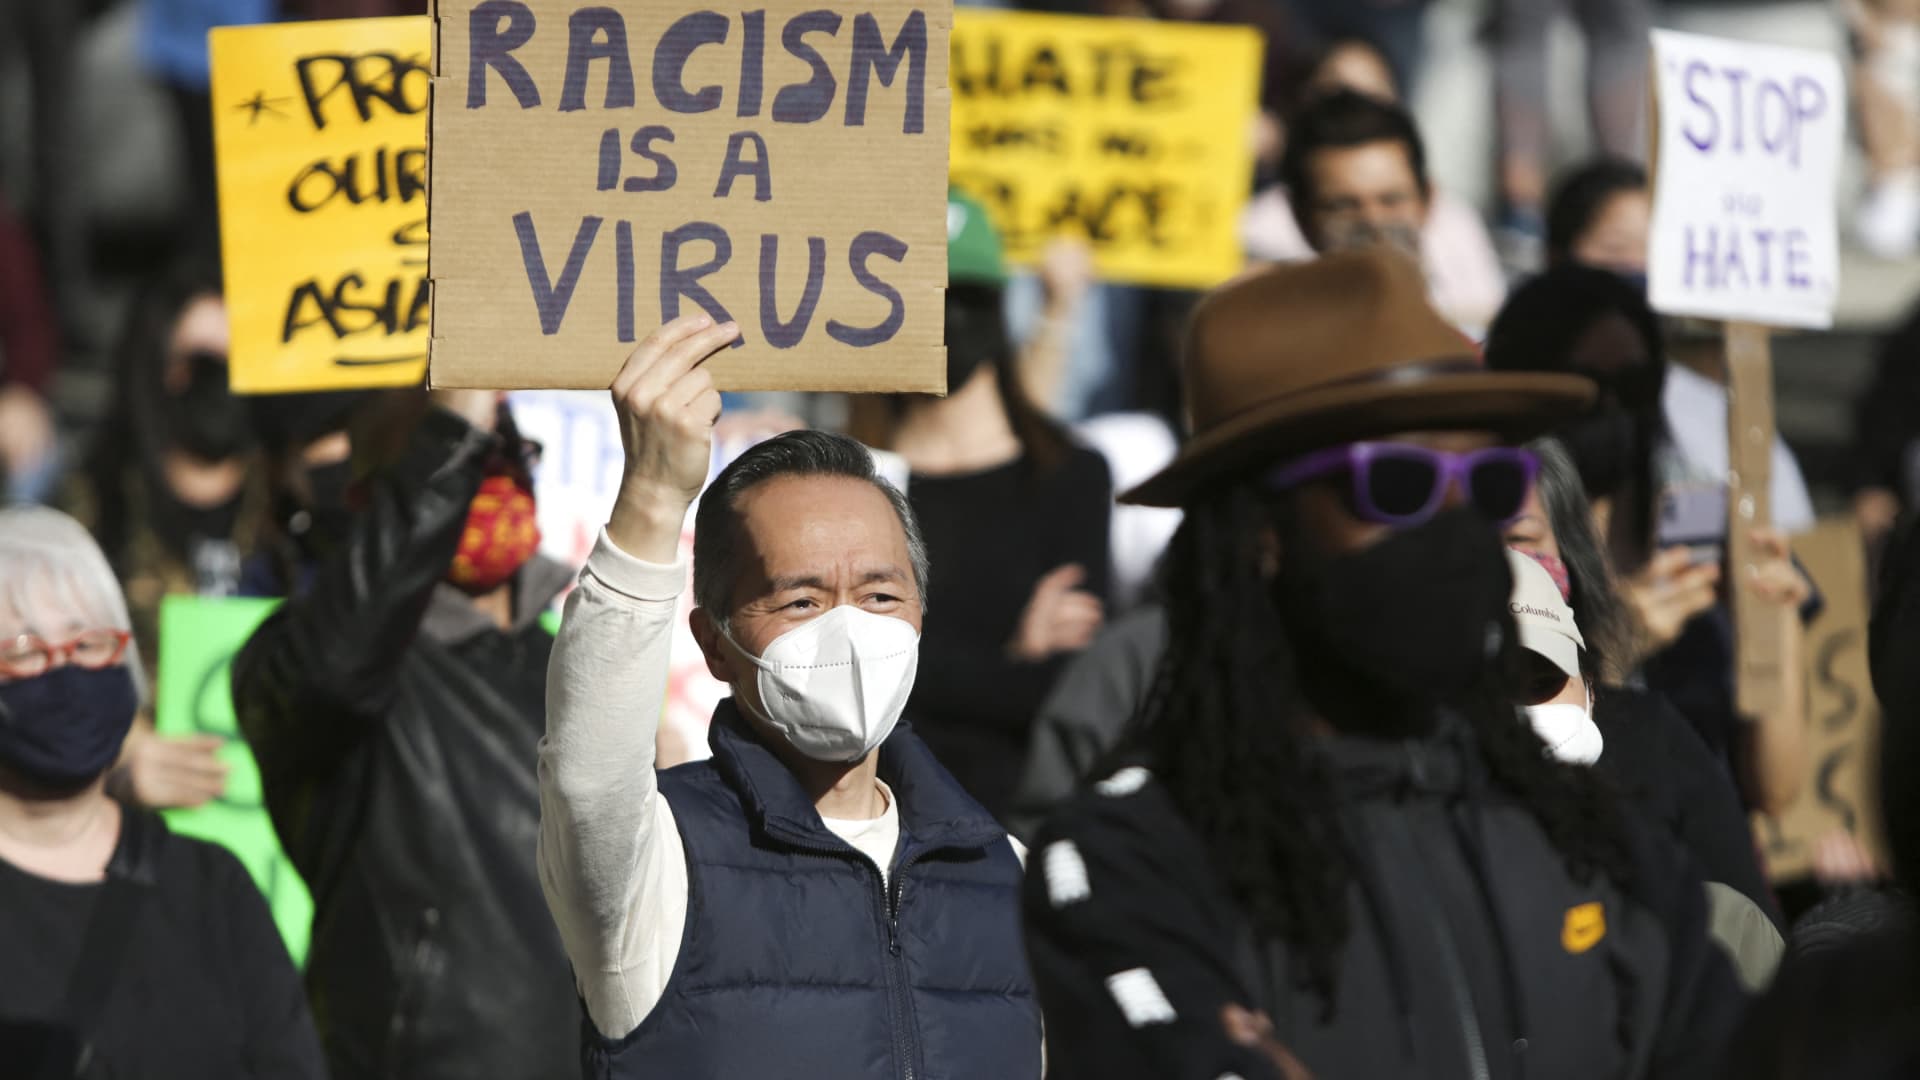 A demonstrator during a rally in Seattle on March 13, 2021.